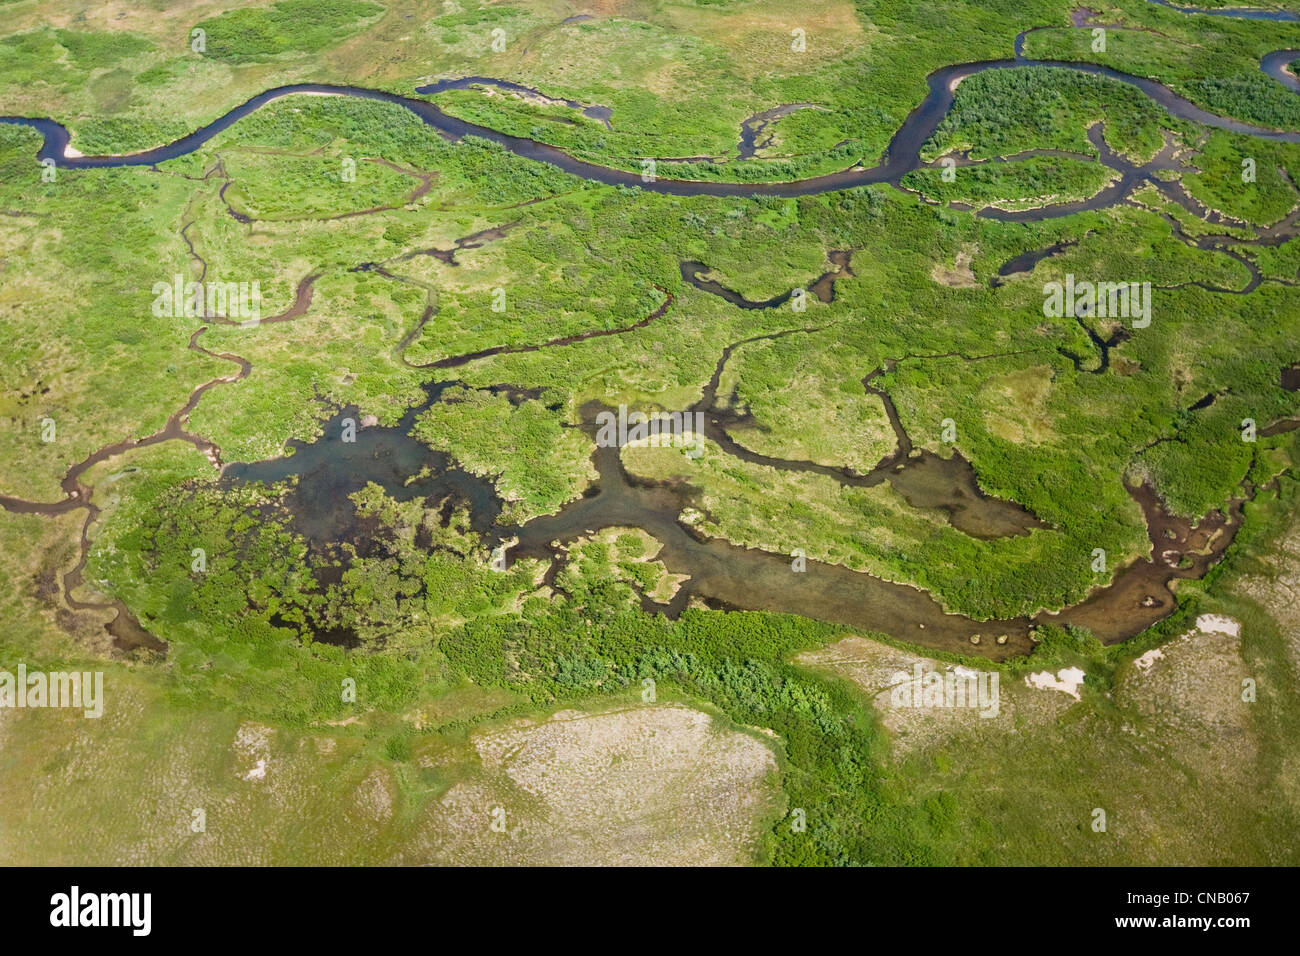 Aerial view of the Koktuli River near the proposed Pebble Mine in Bristol Bay area, Southwest Alaska, Summer Stock Photo